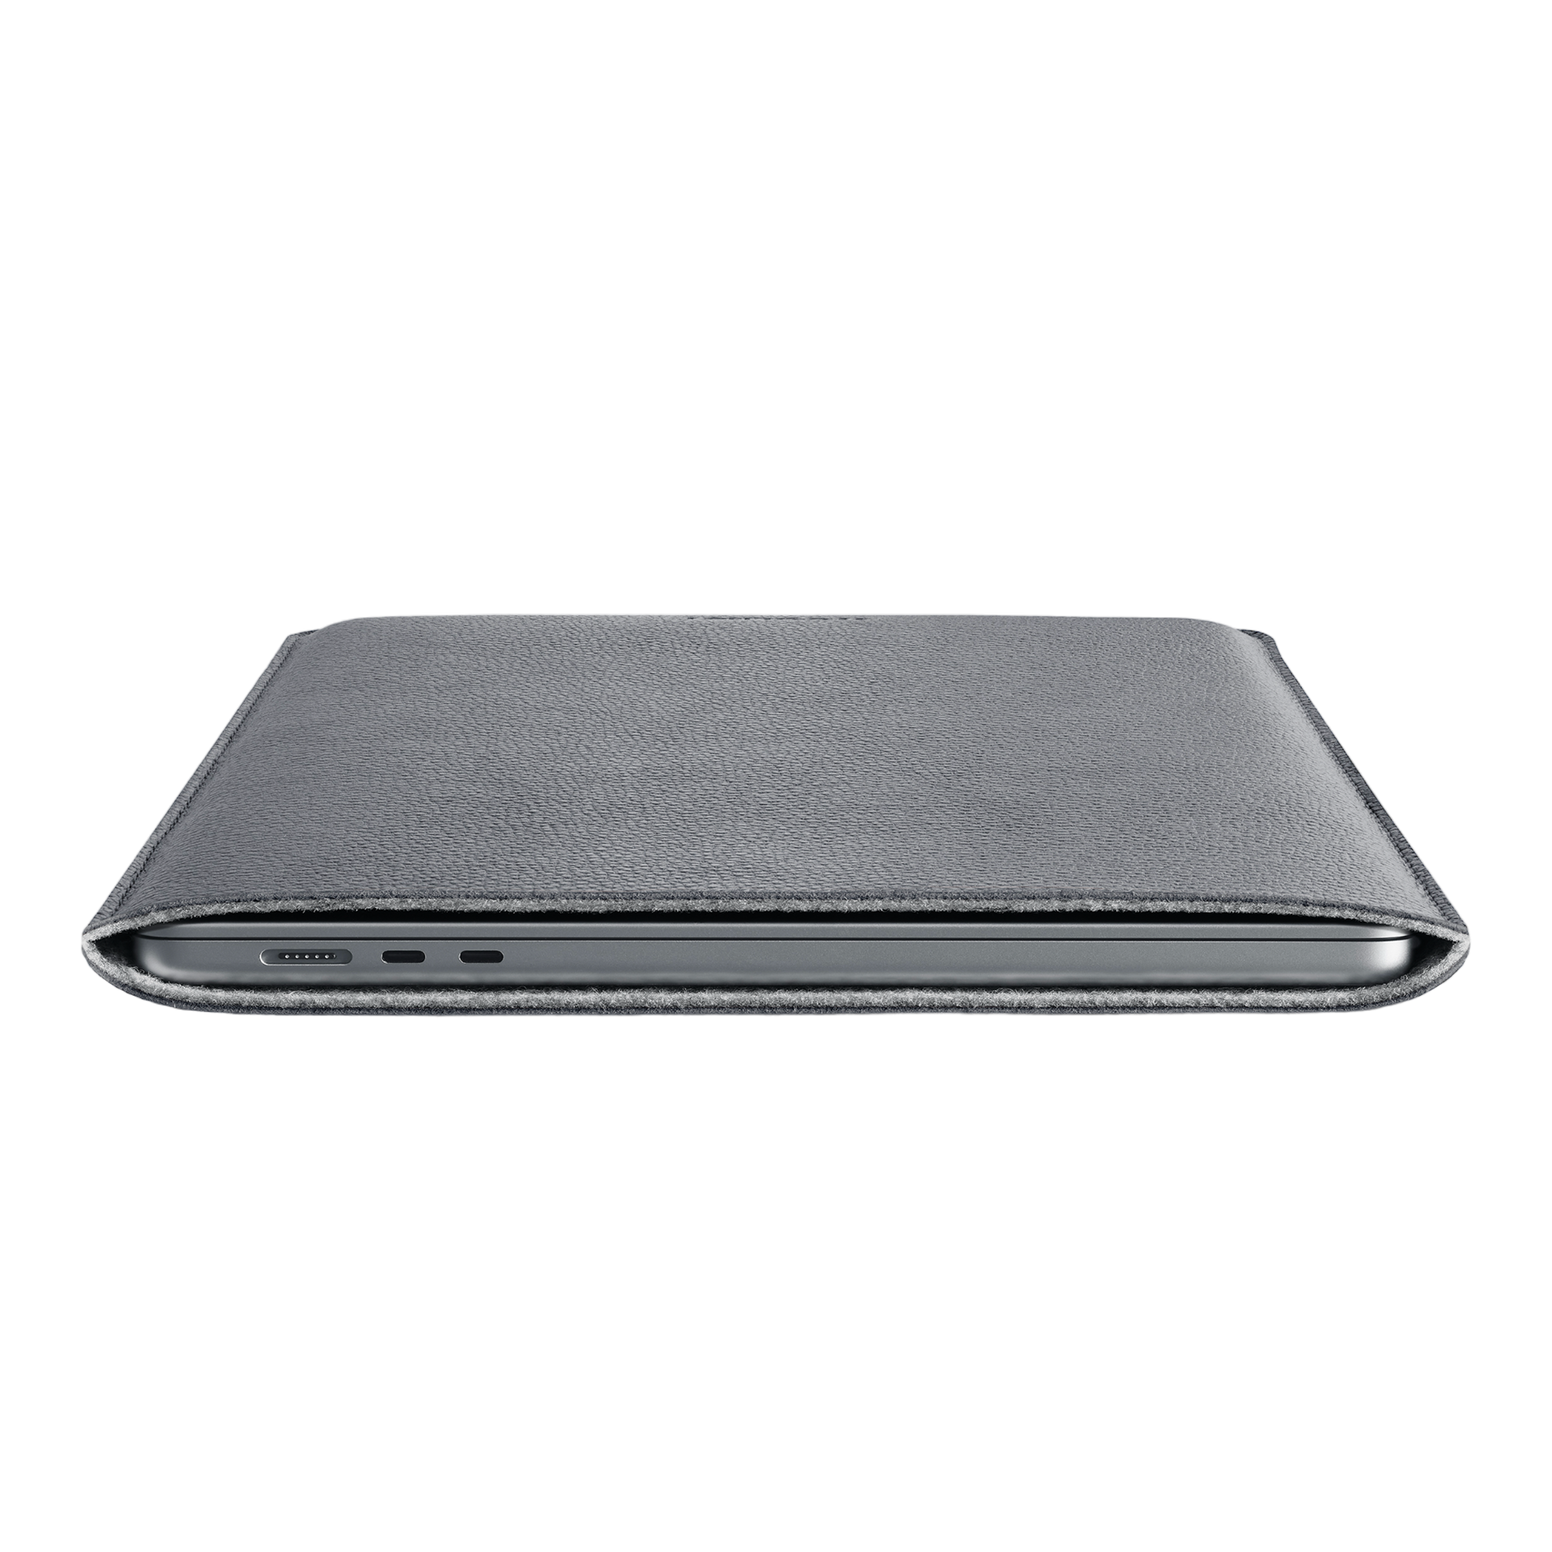 WOOLNUT Leather Sleeve for 15-Inch MacBook Air - Grey